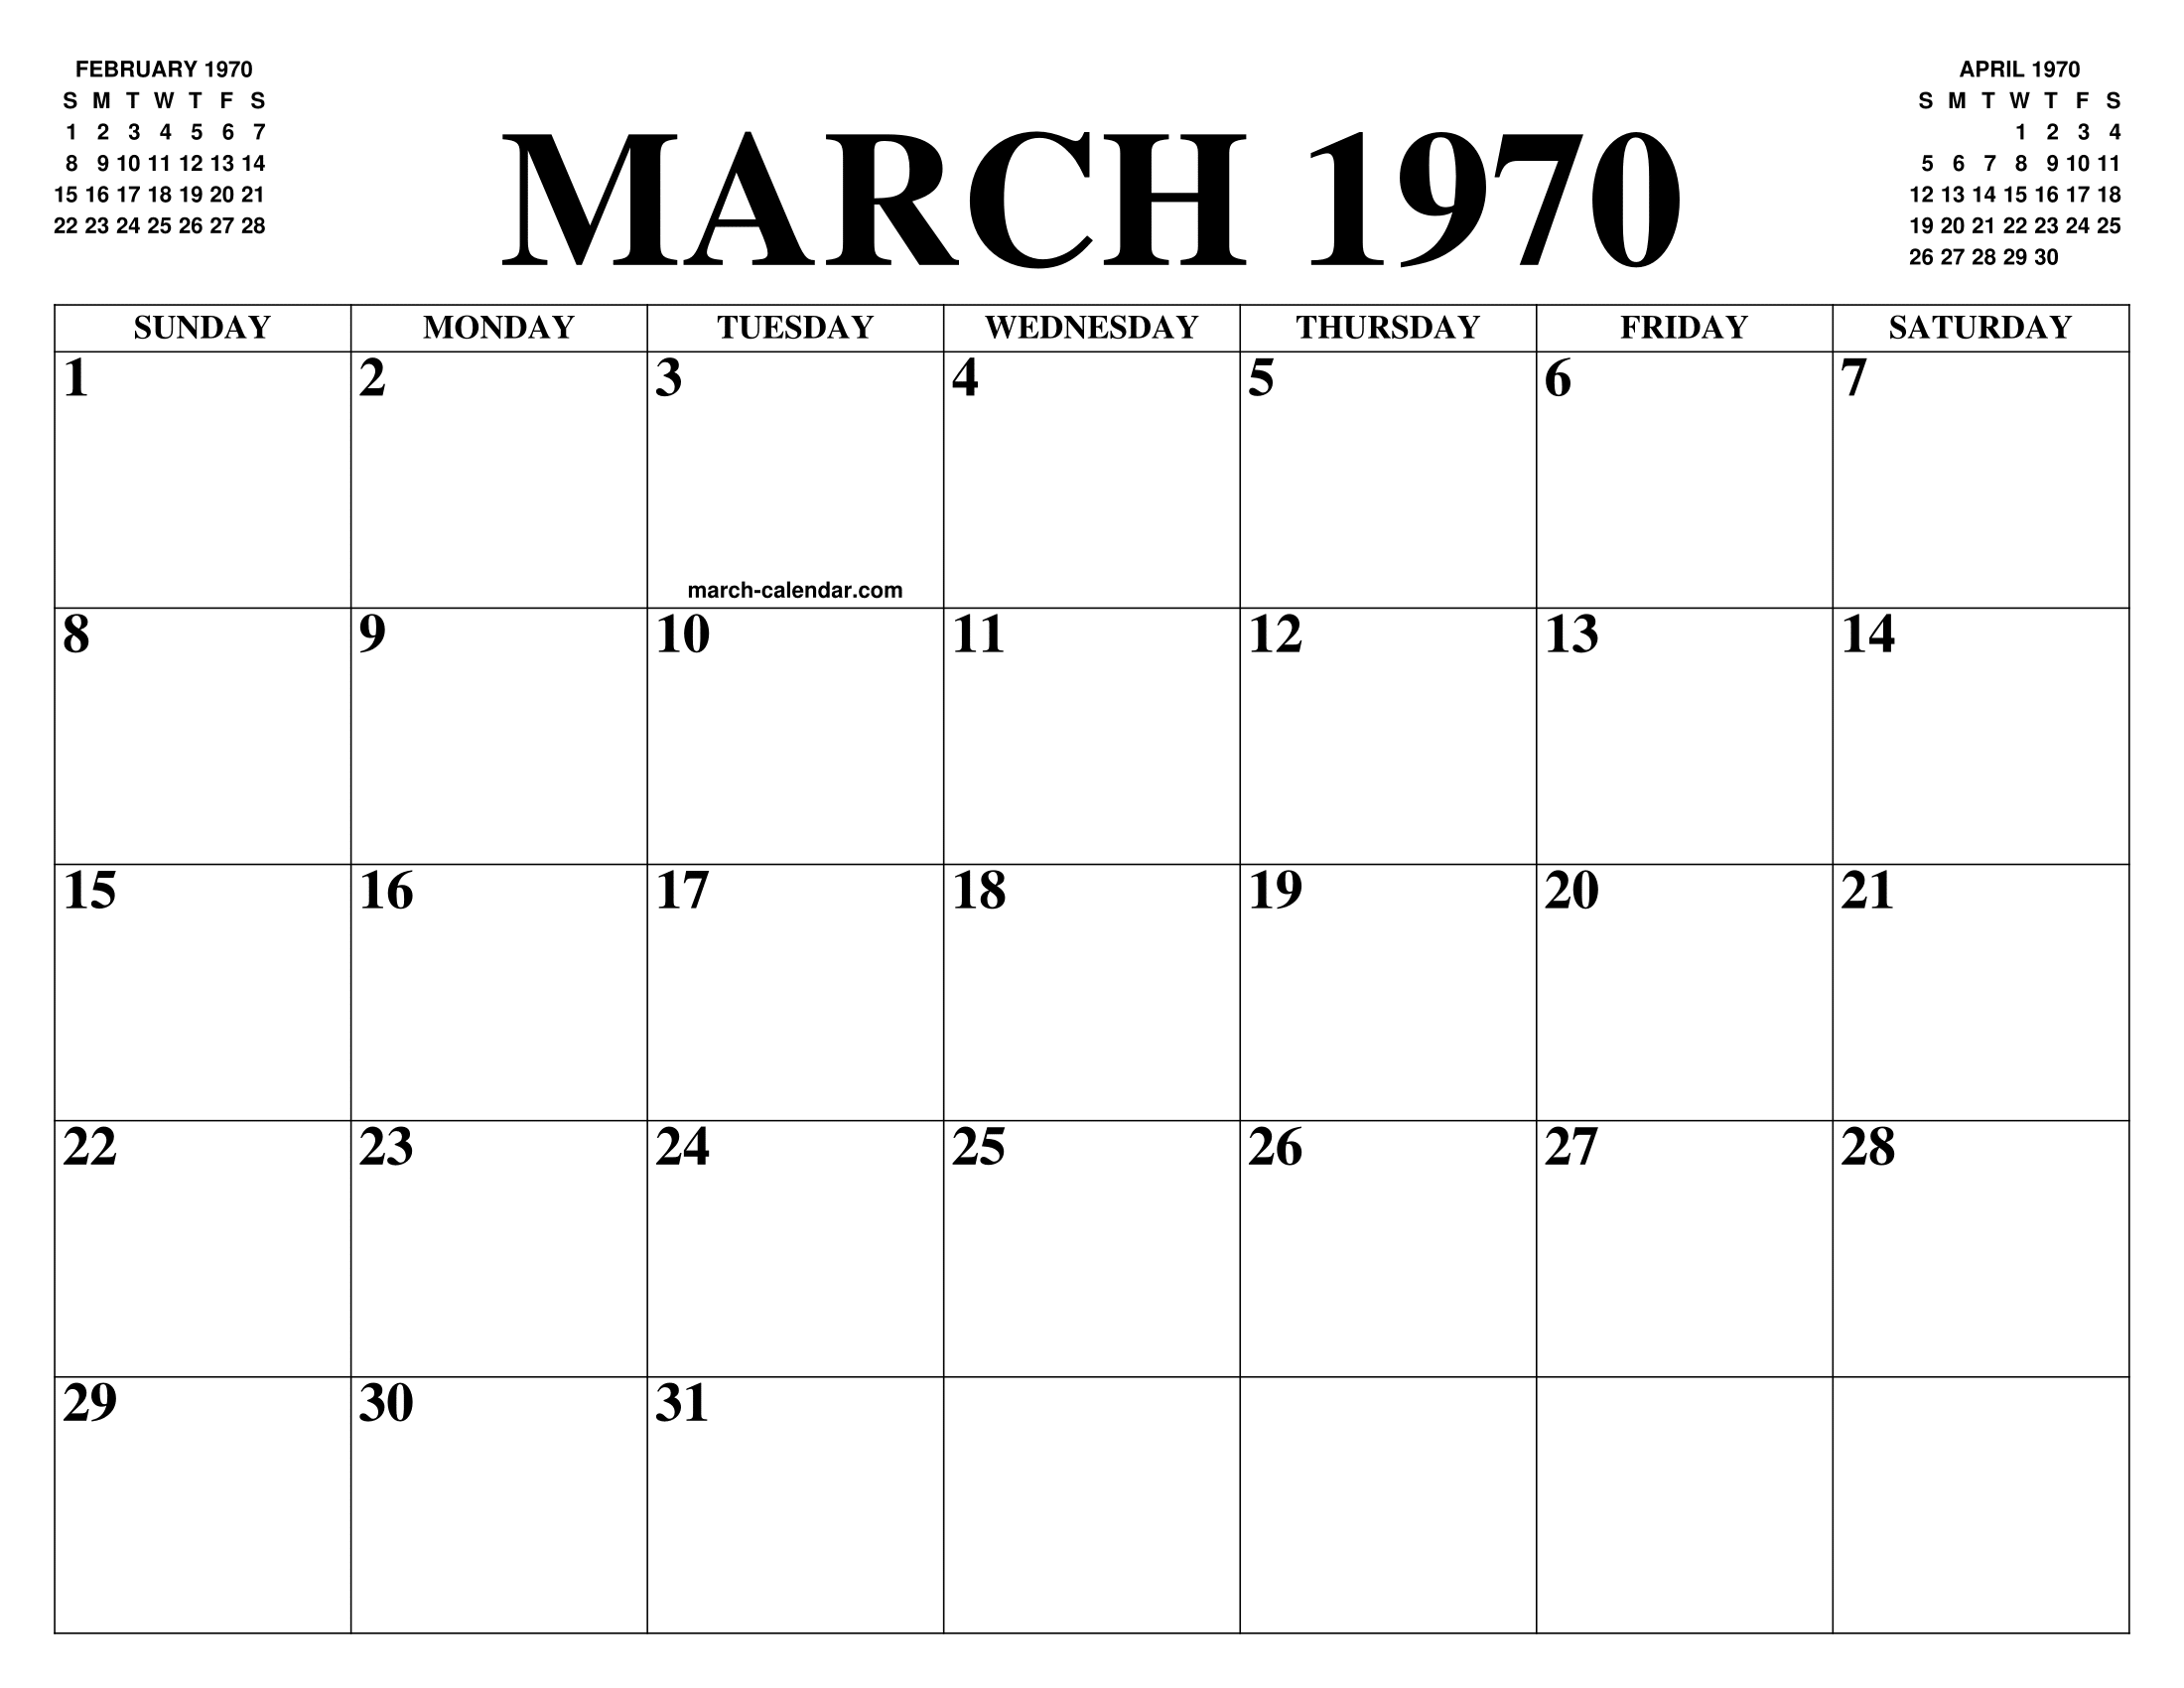 MARCH 1970 CALENDAR OF THE MONTH: FREE PRINTABLE MARCH CALENDAR OF THE